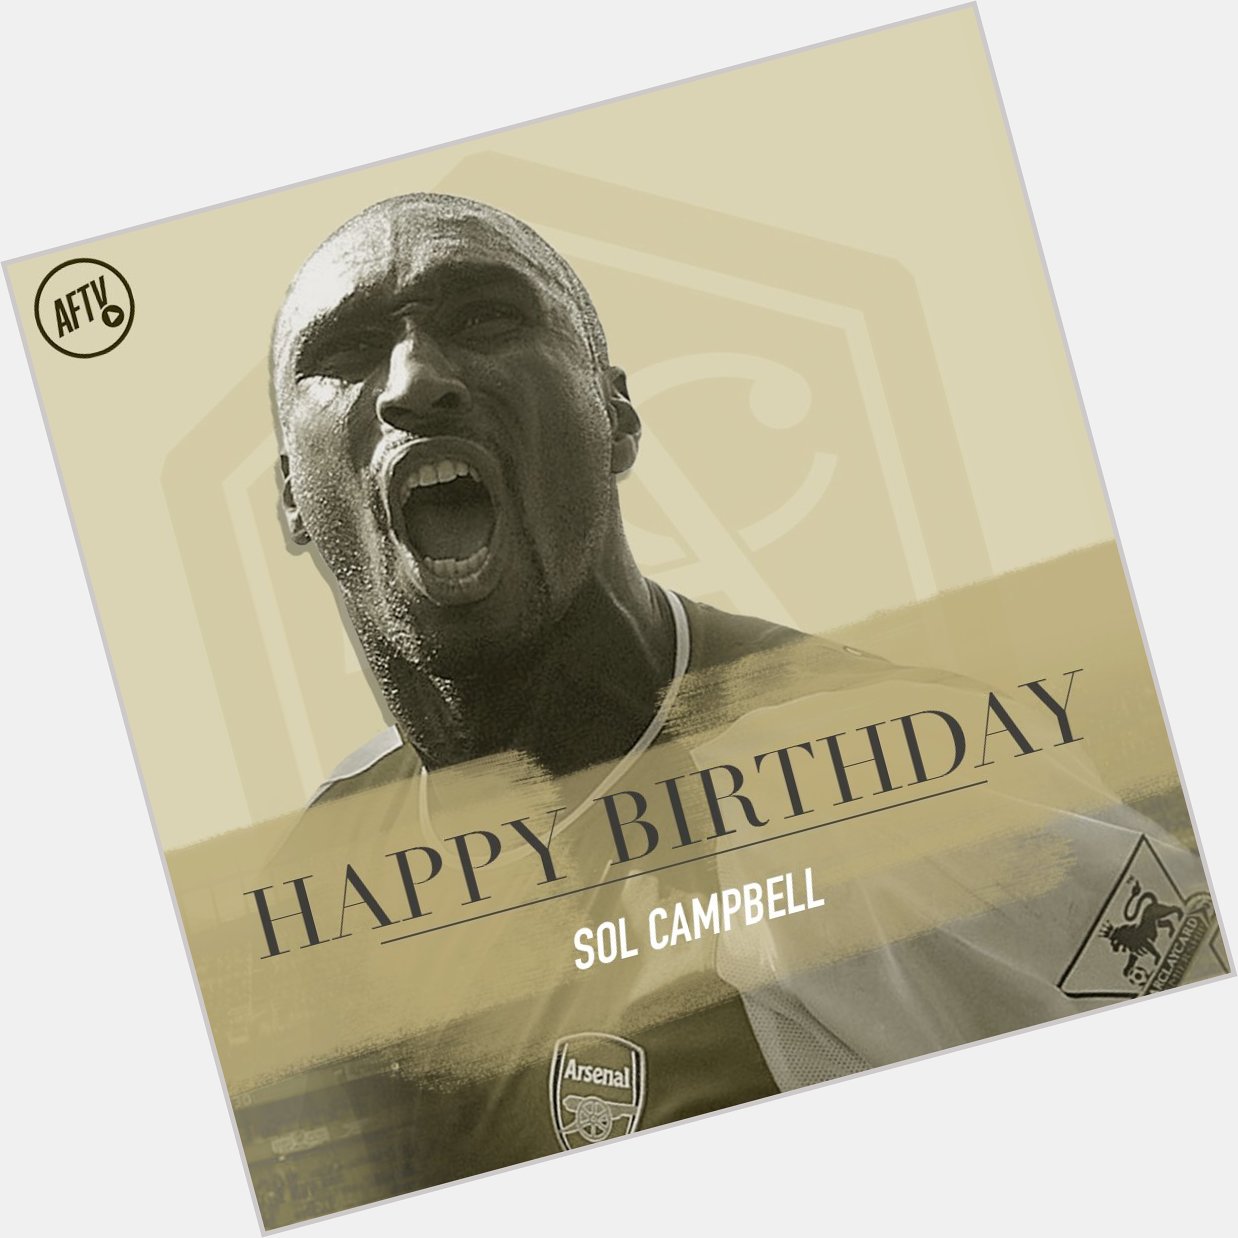 Happy birthday to you, Sol Campbell.             